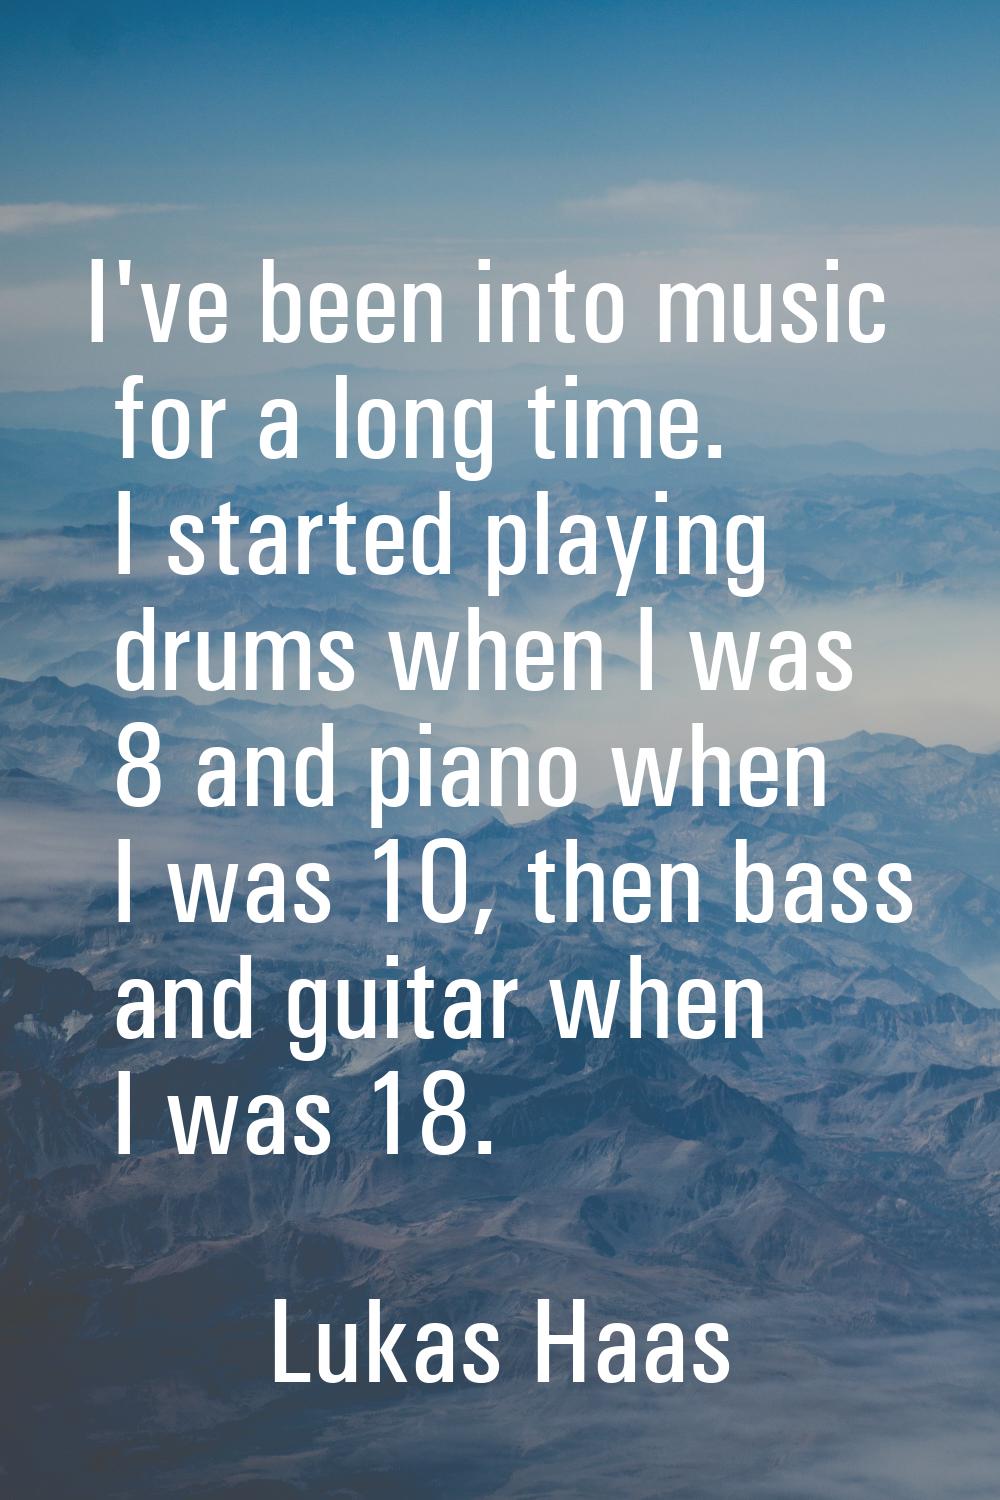 I've been into music for a long time. I started playing drums when I was 8 and piano when I was 10,